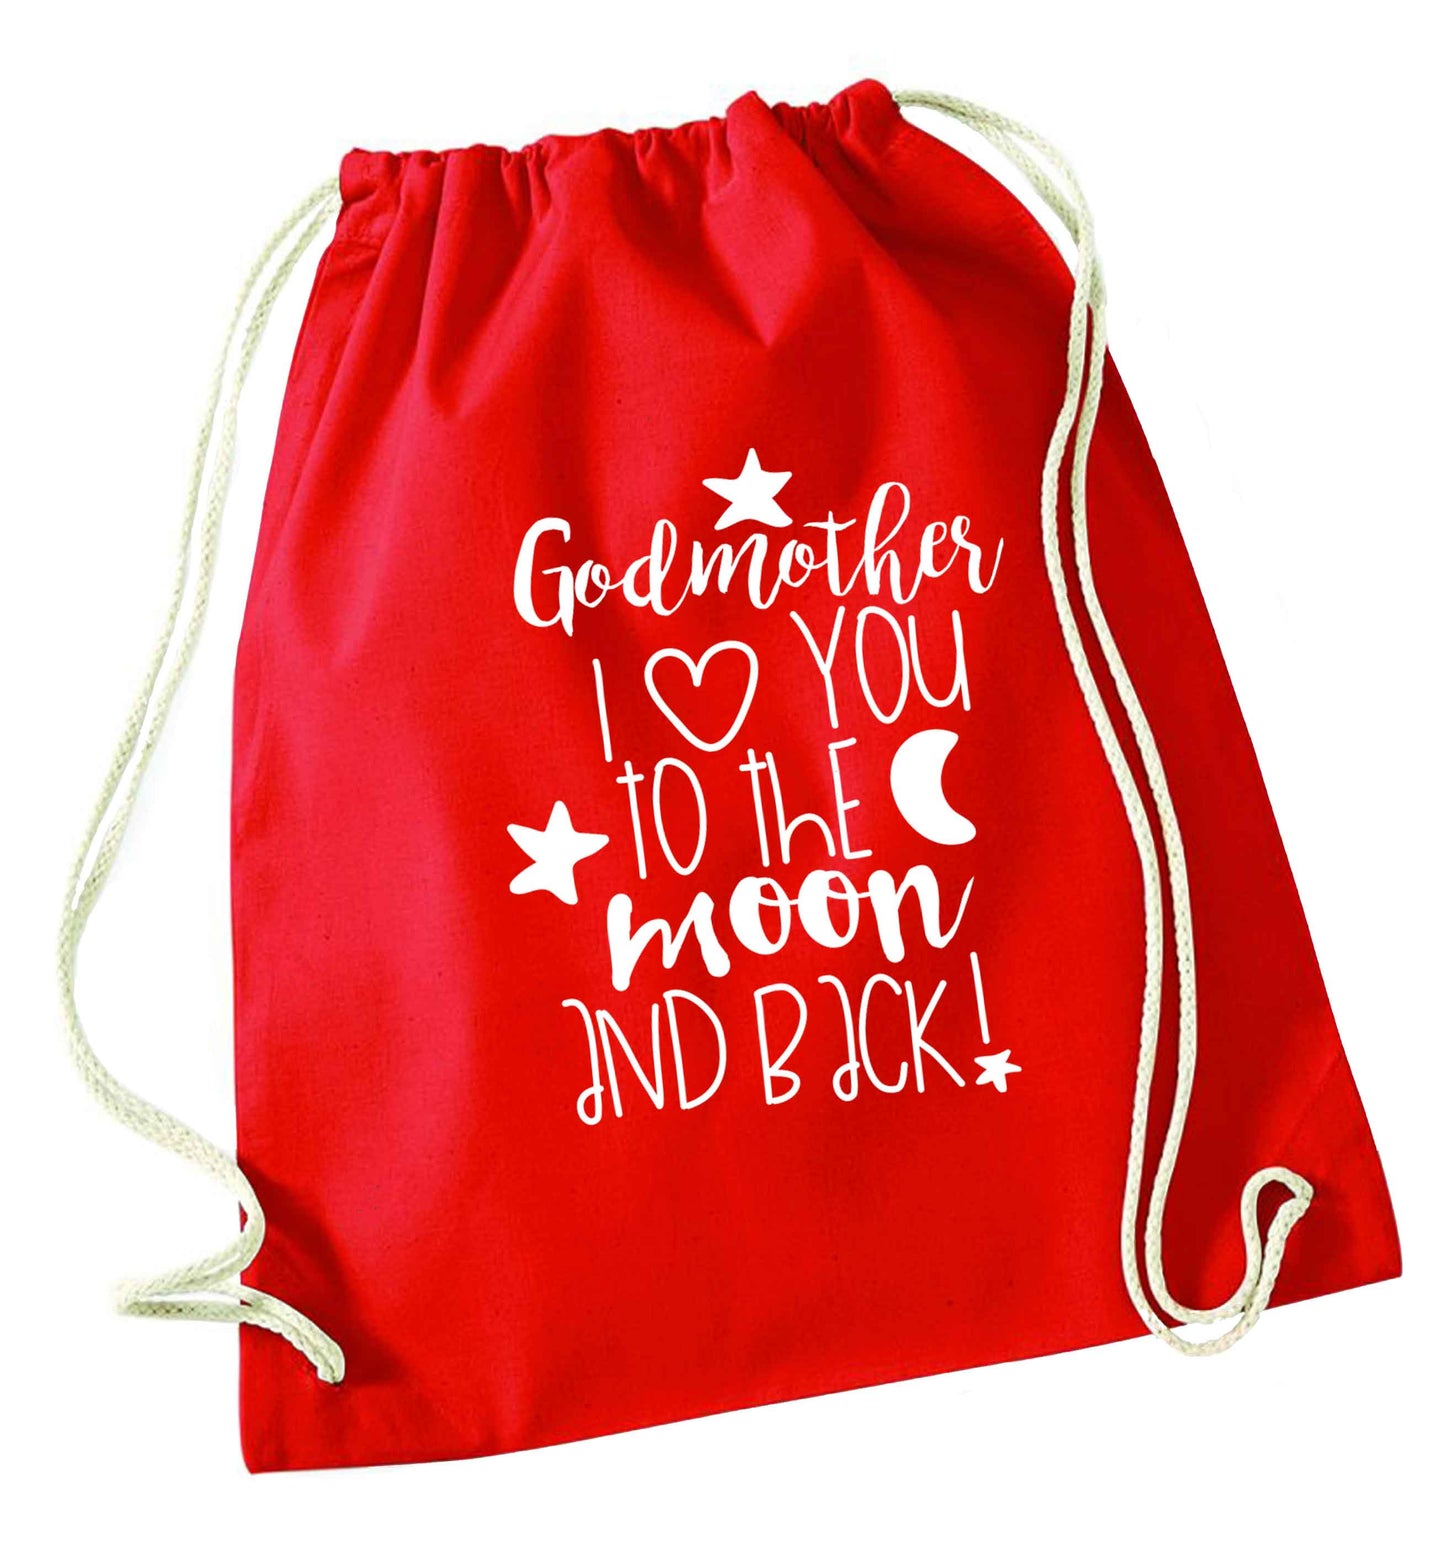 Godmother I love you to the moon and back red drawstring bag 